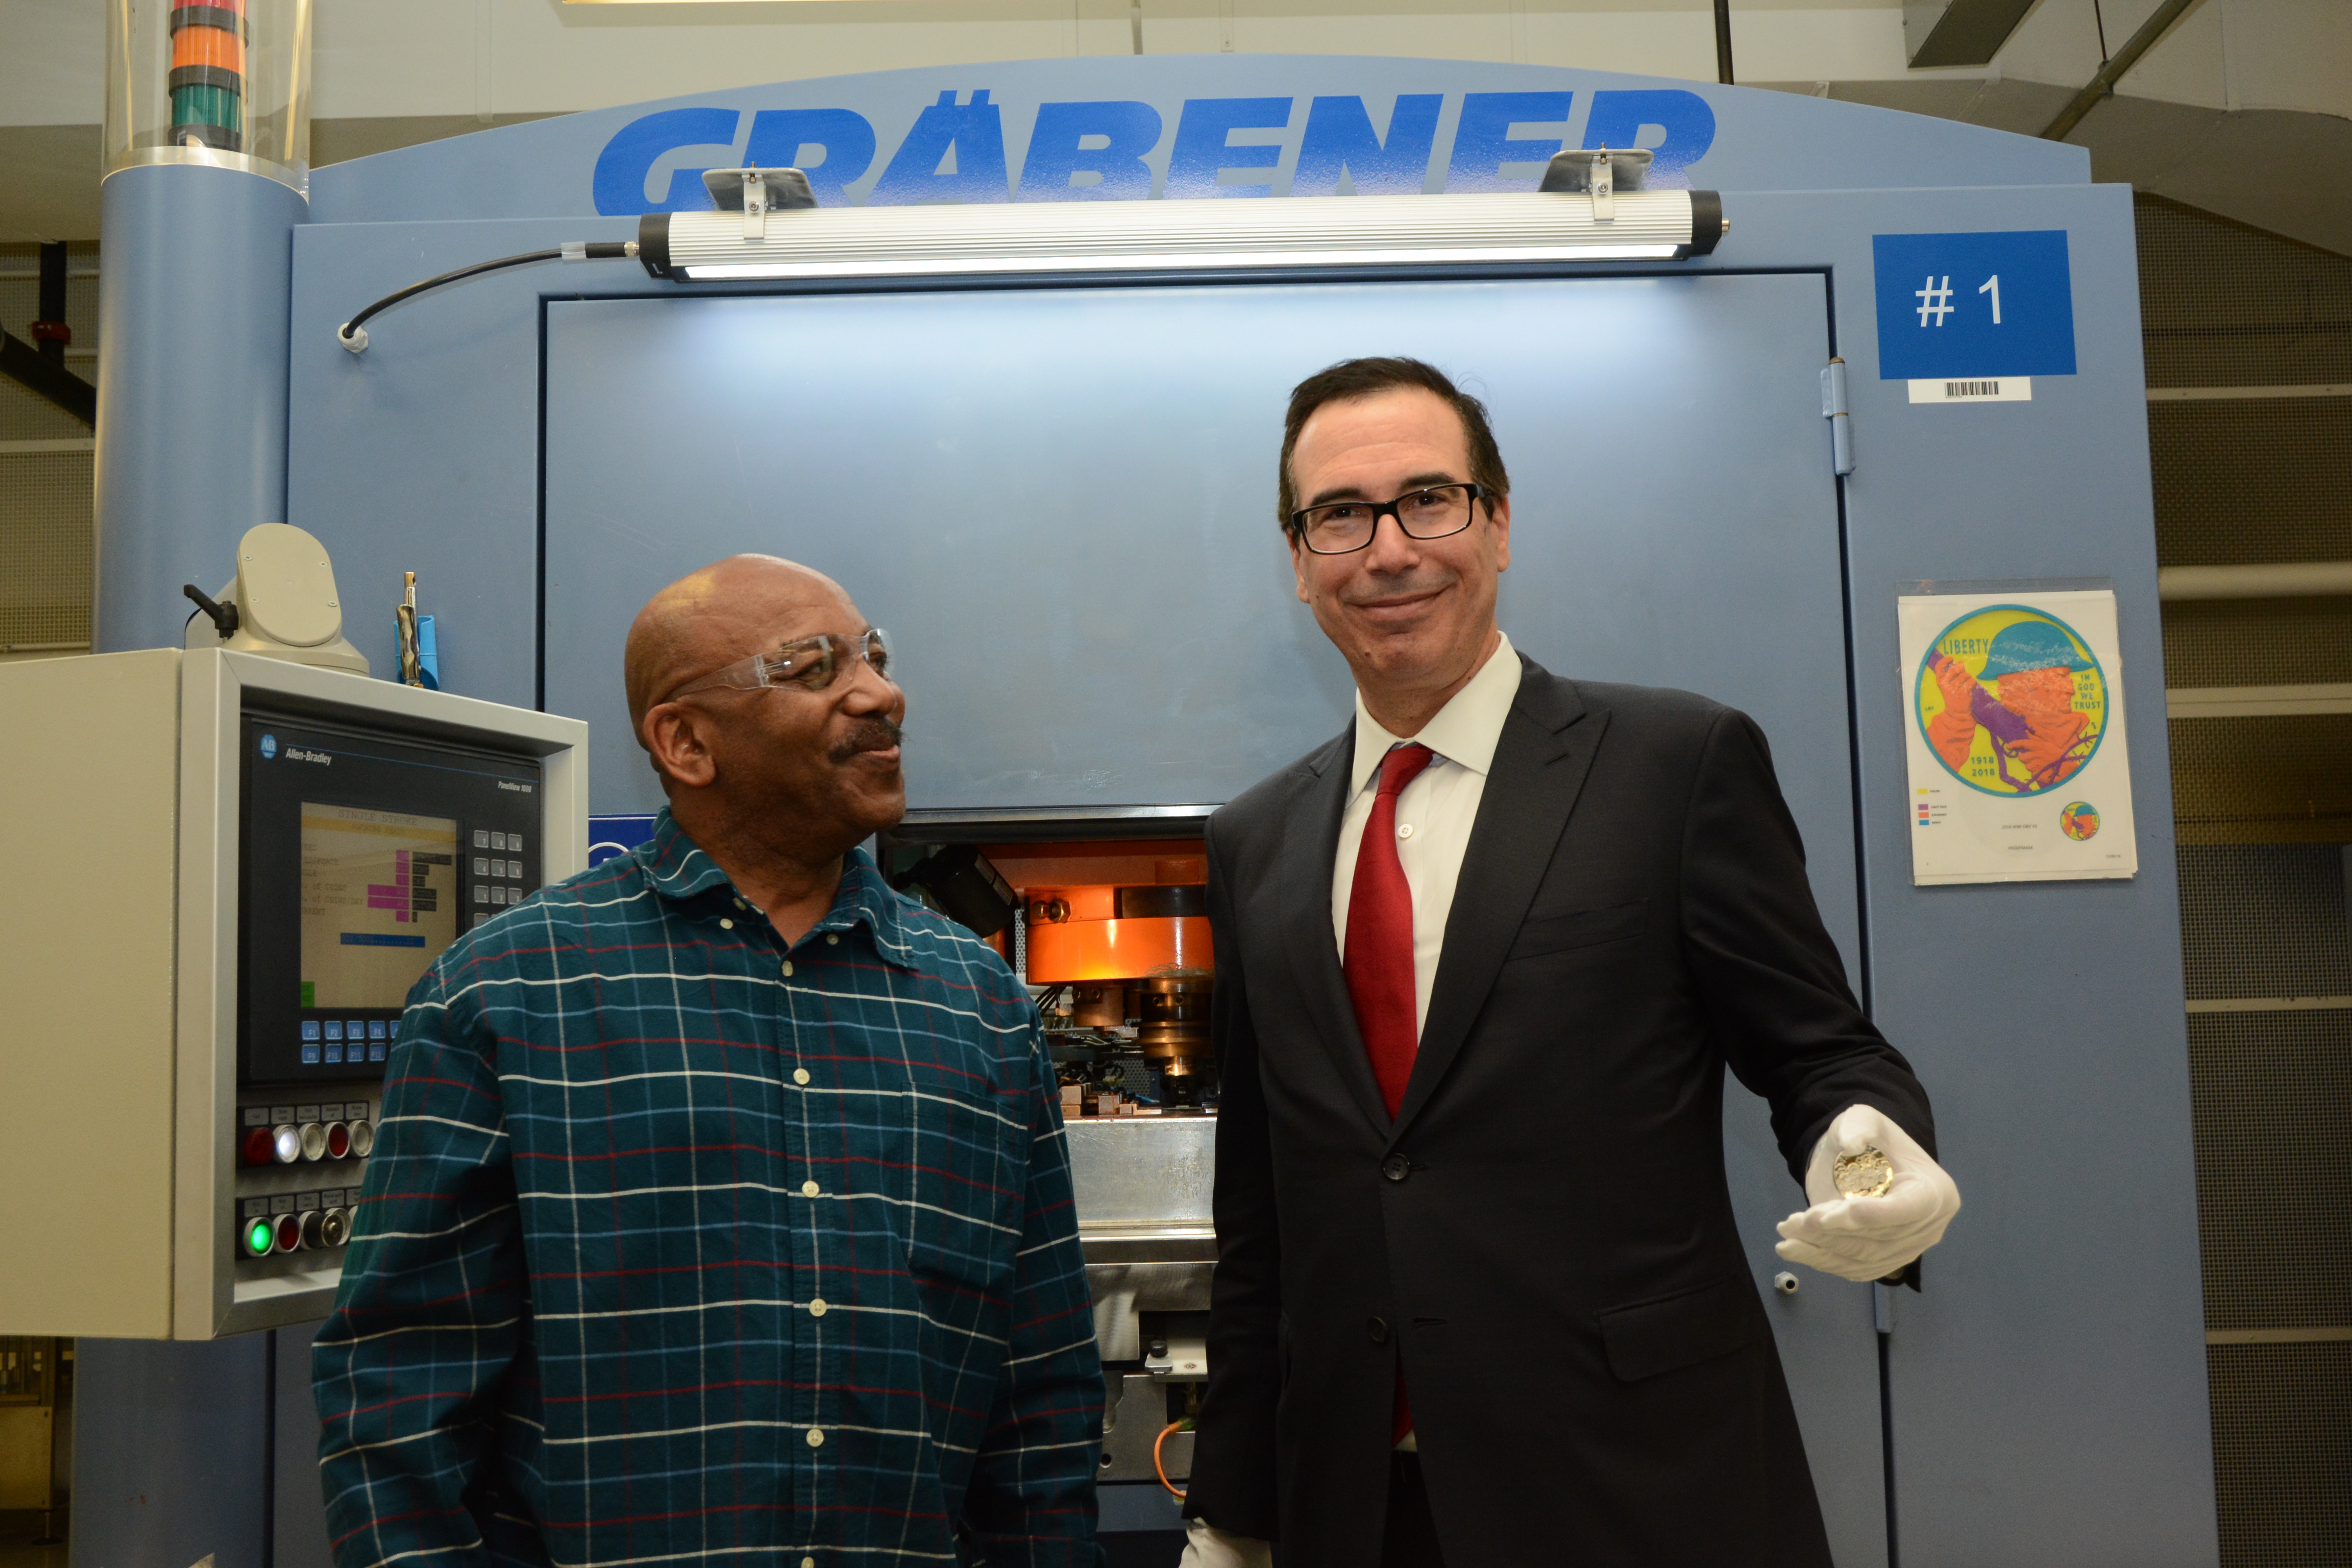 U.S. Mint Coin Press Operator Kenny Holland poses for a photo with Treasury Secretary Steven Mnuchin, who is holding a newly struck World War I Centennial 2018 Proof Silver Dollar at the U.S. Mint facility in Philadelphia on February 22, 2018. U.S. Mint p